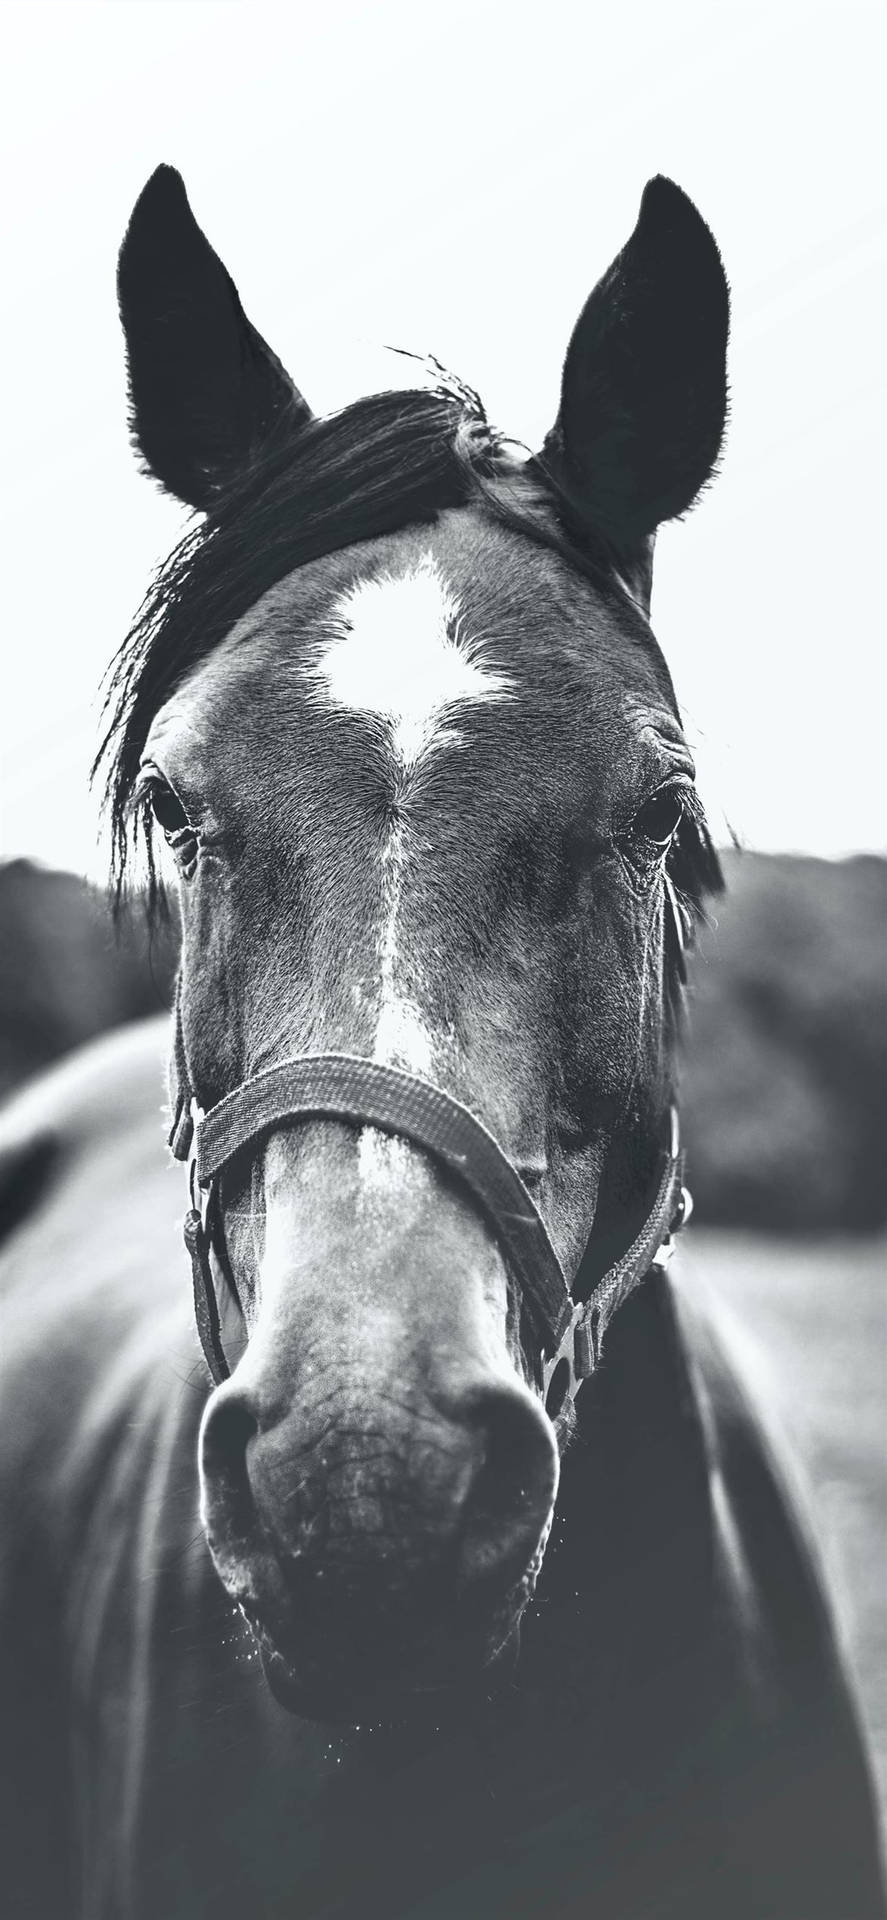 Greyscale Horse Iphone Wallpaper